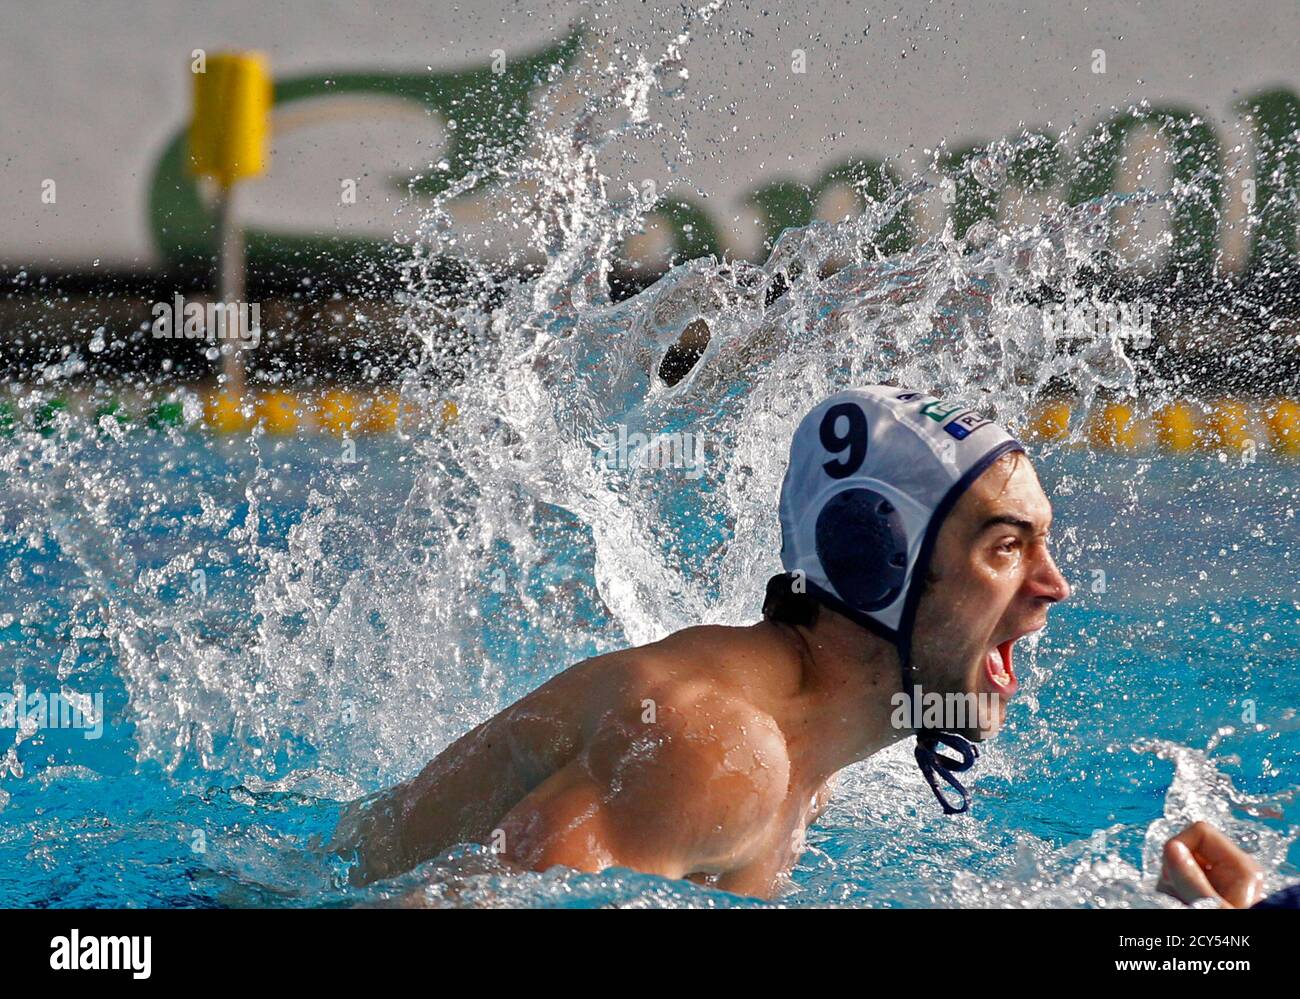 Drasko Brguljan of Vasas celebrates his goal against ZF Eger during the  final match of the Hungarian water polo championship in Budapest April 29,  2012. Vasa won the championship. REUTERS/Laszlo Balogh (HUNGARY -